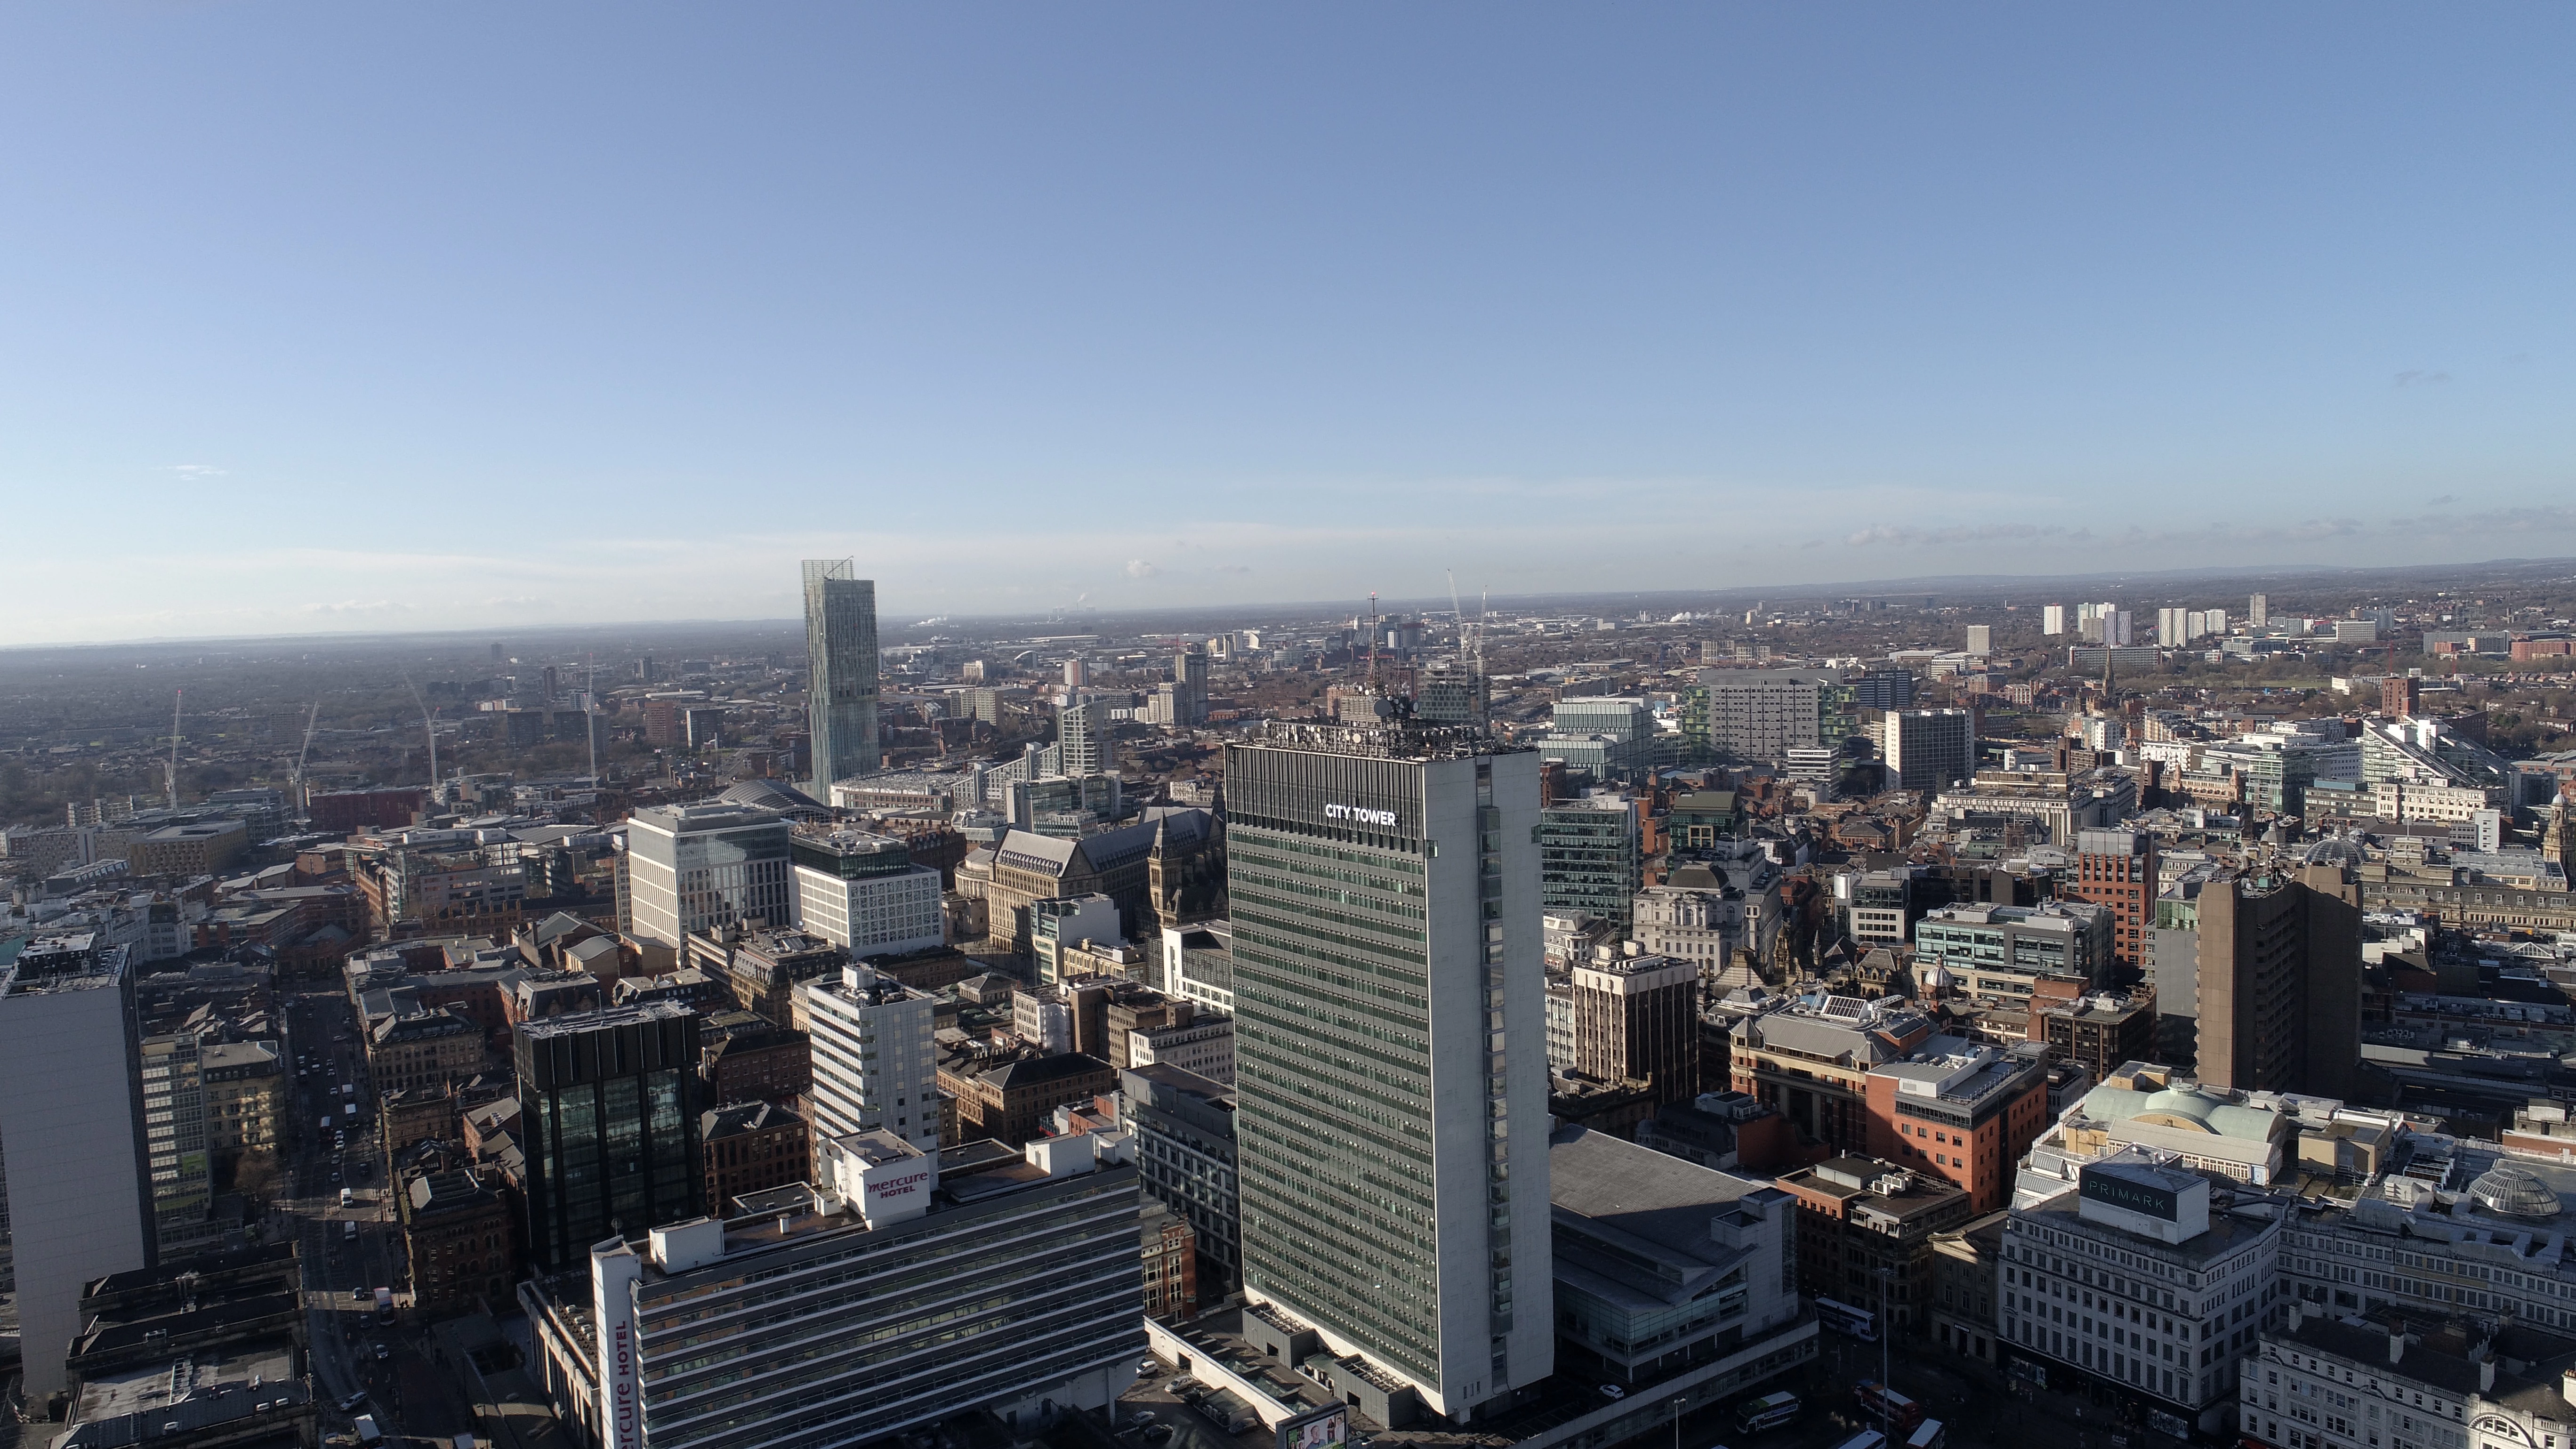 dunnhumby’s Manchester operation is based across the entire 23rd floor at City Tower